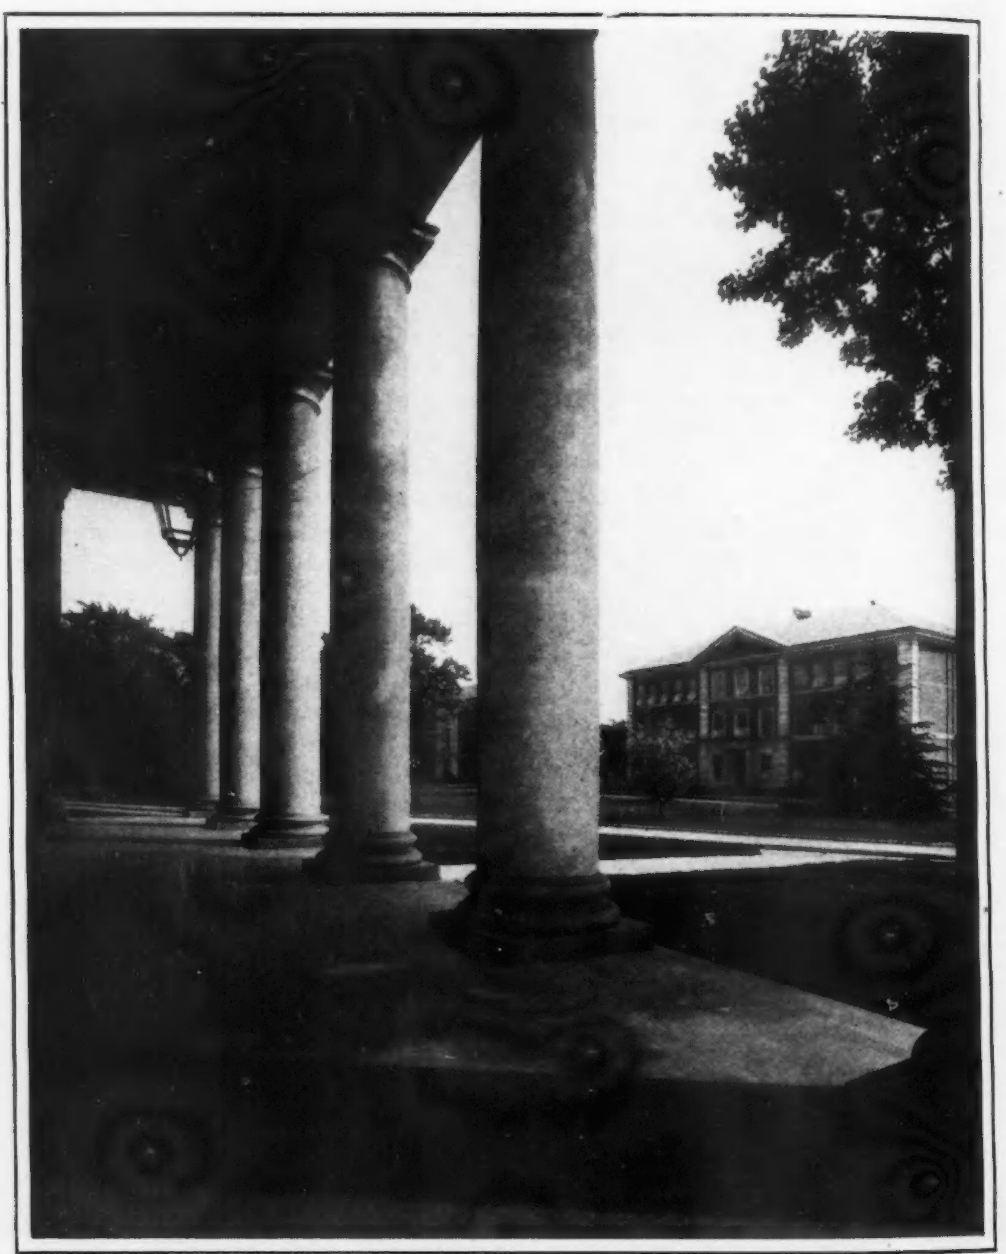 Tapley Hall, Spelman College, as Seen Through the Pillars of Sisters Chapel.